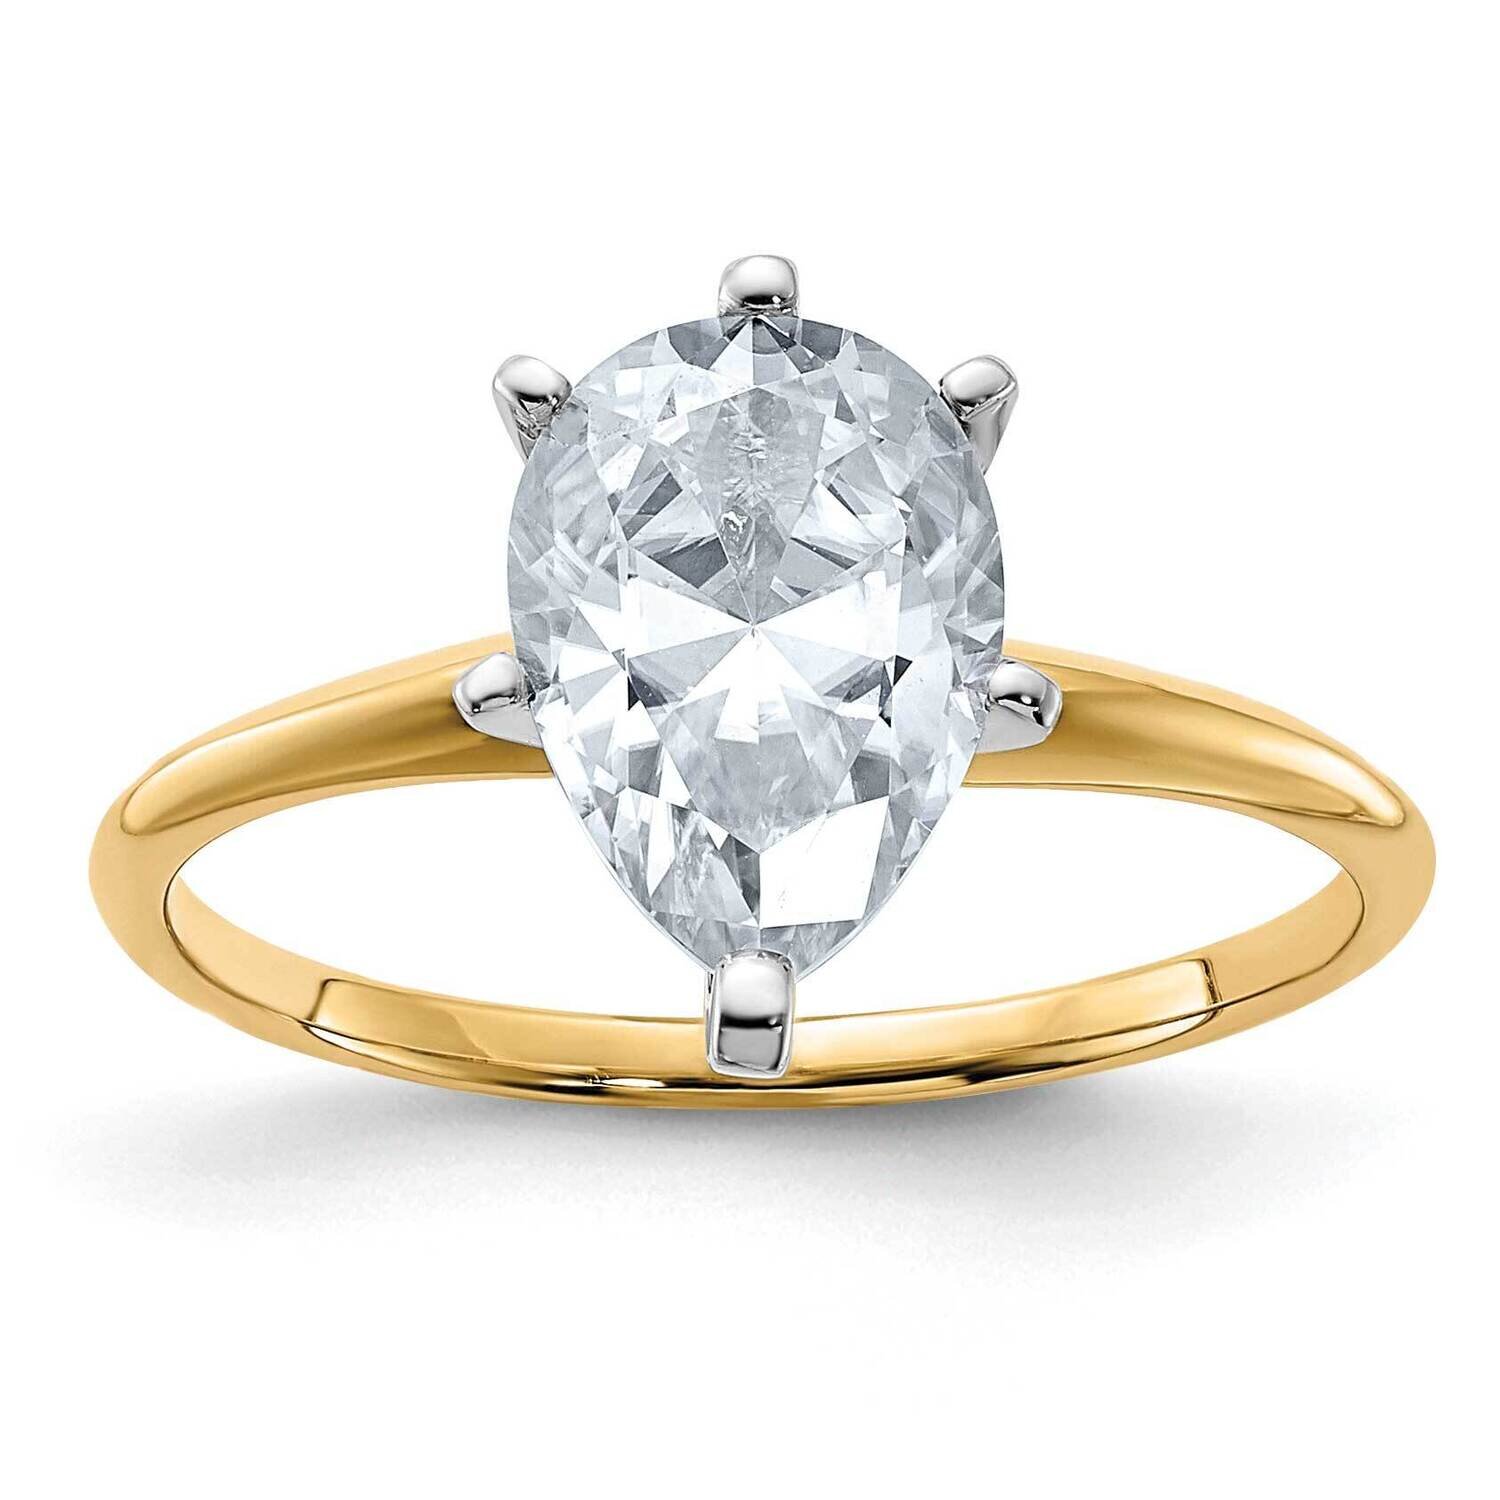 2ct. D E F Pure Light Pear Moissanite Solitaire Ring 14k Gold YGSH15A-15MP-8